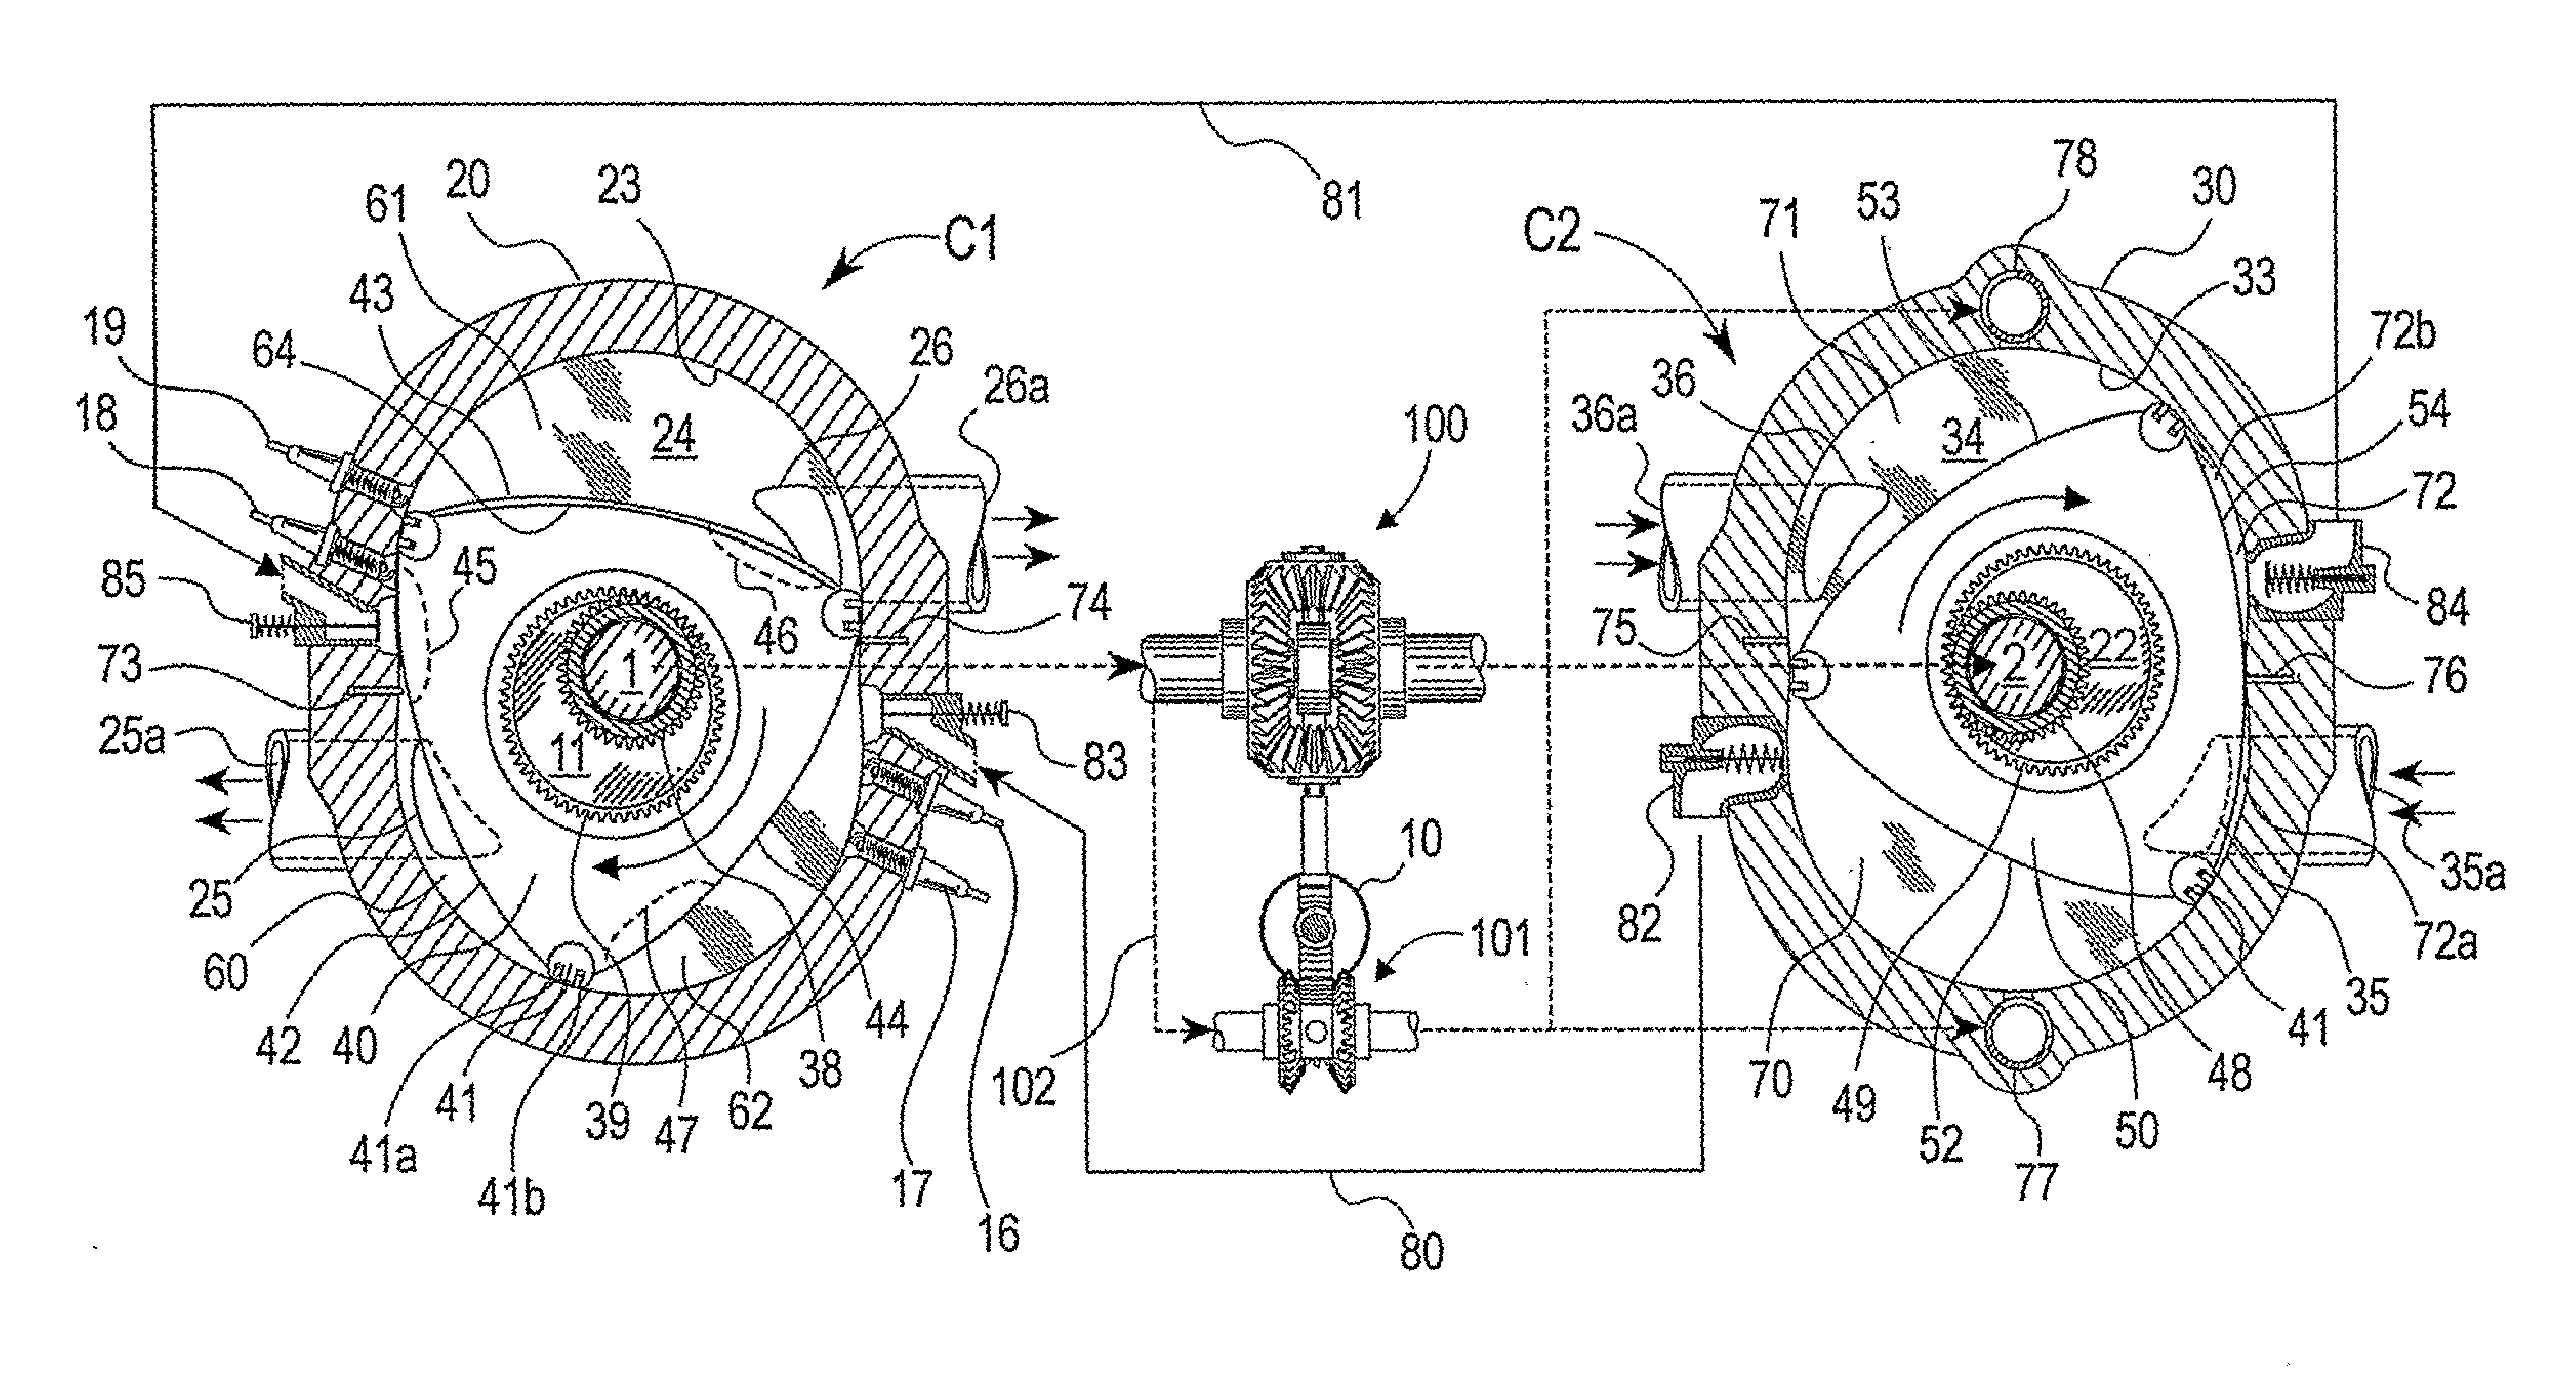 Split Cycle Variable Capacity Rotary Spark Ignition Engine